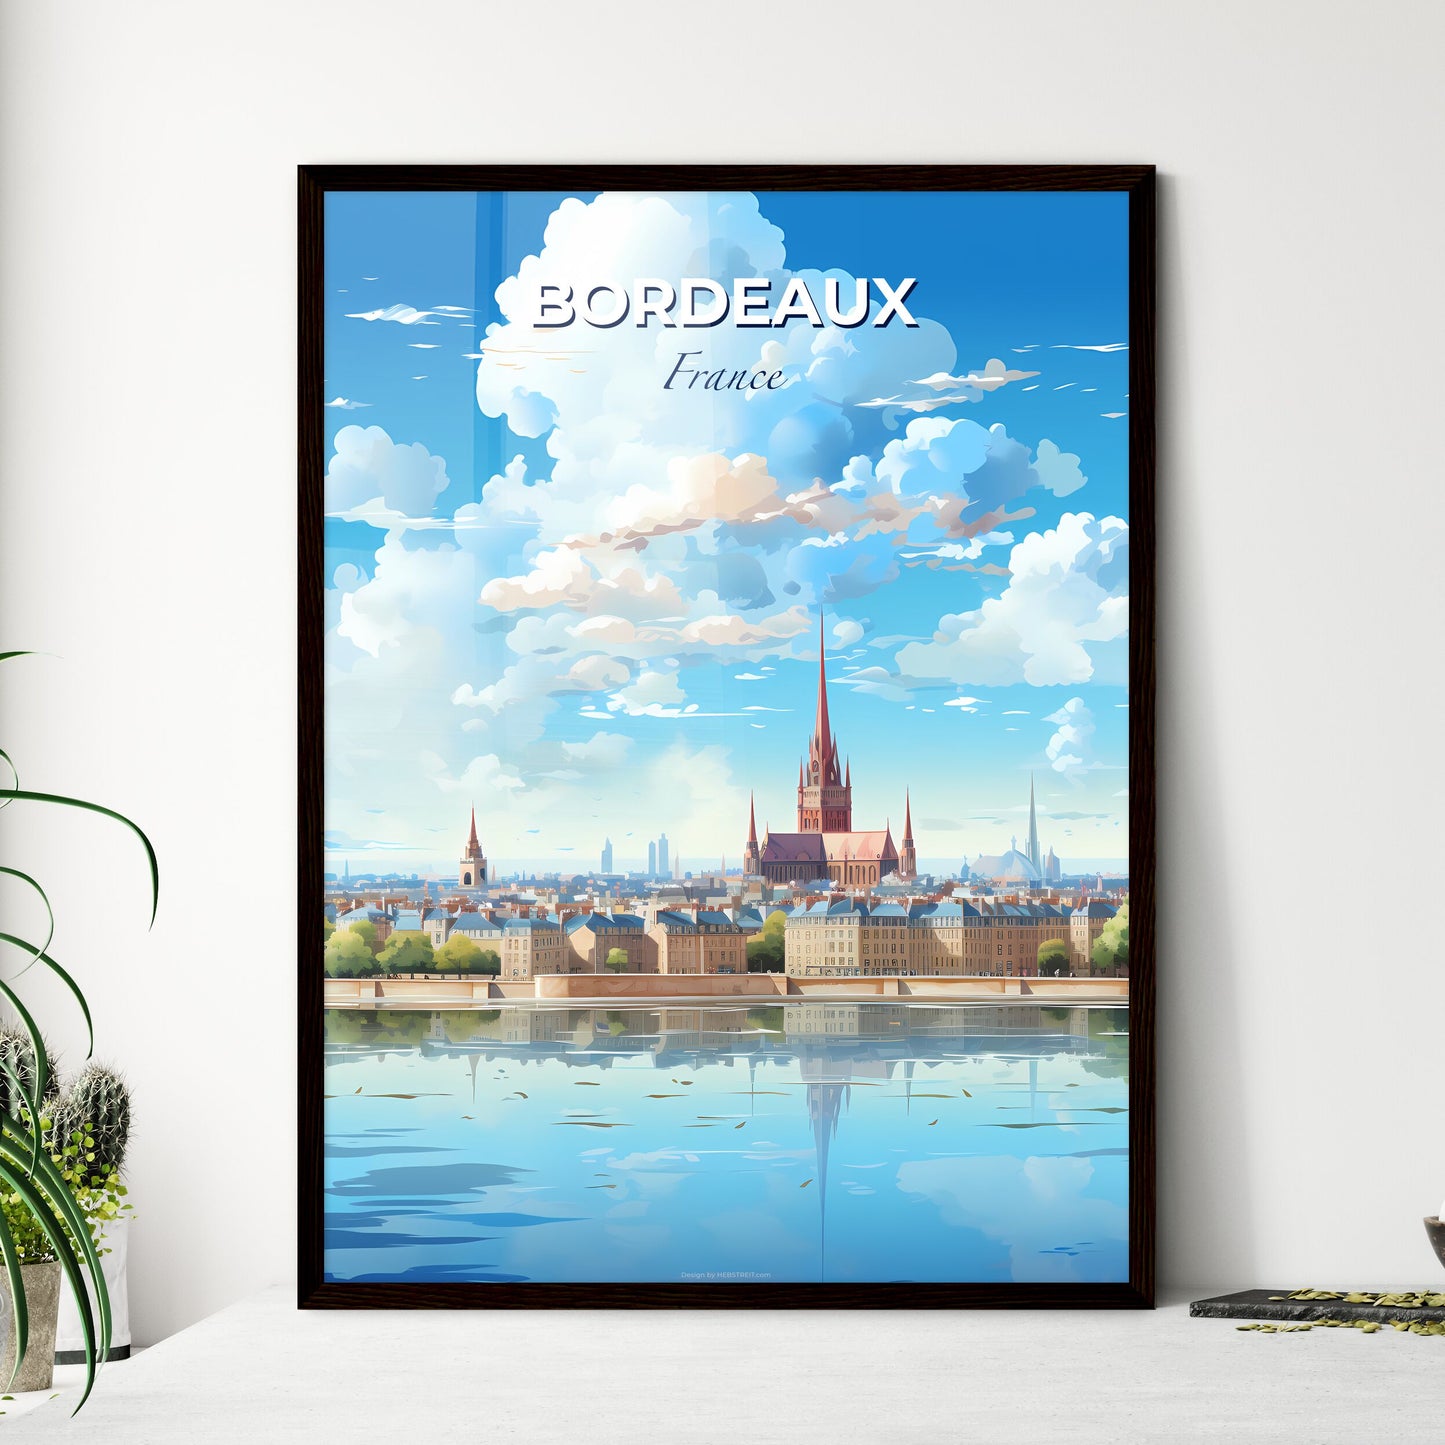 Bordeaux France Skyline - A City With A Tower And A Body Of Water - Customizable Travel Gift Default Title